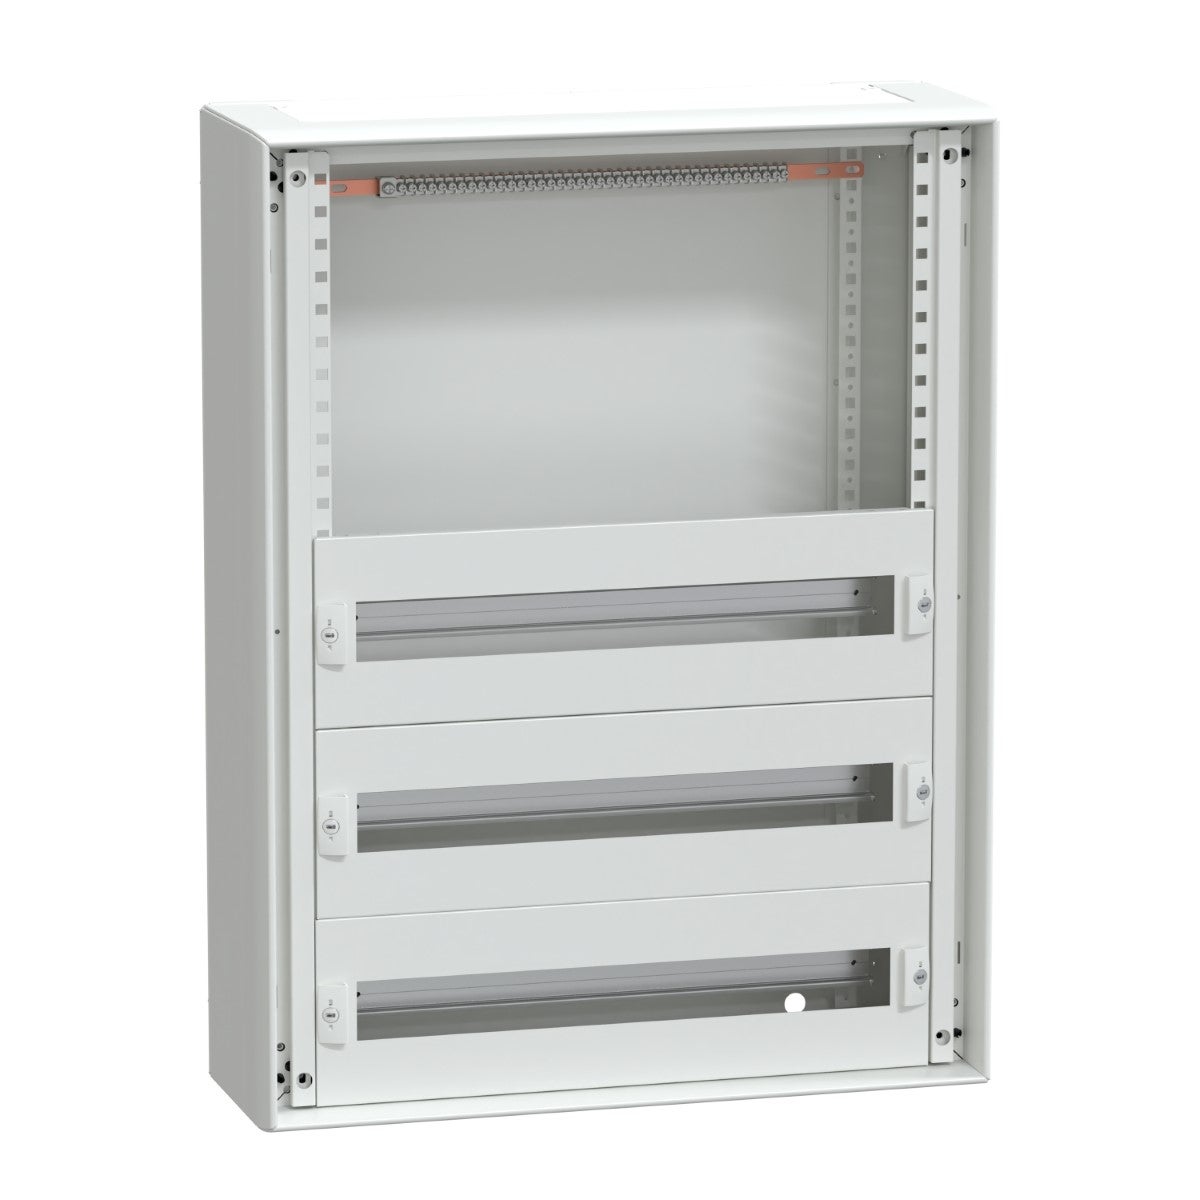 Enclosure, PrismaSeT G, for modular devices, wall mounted, W600mm, H780mm (3R + incomer), IP30, with front plates, Pack 250